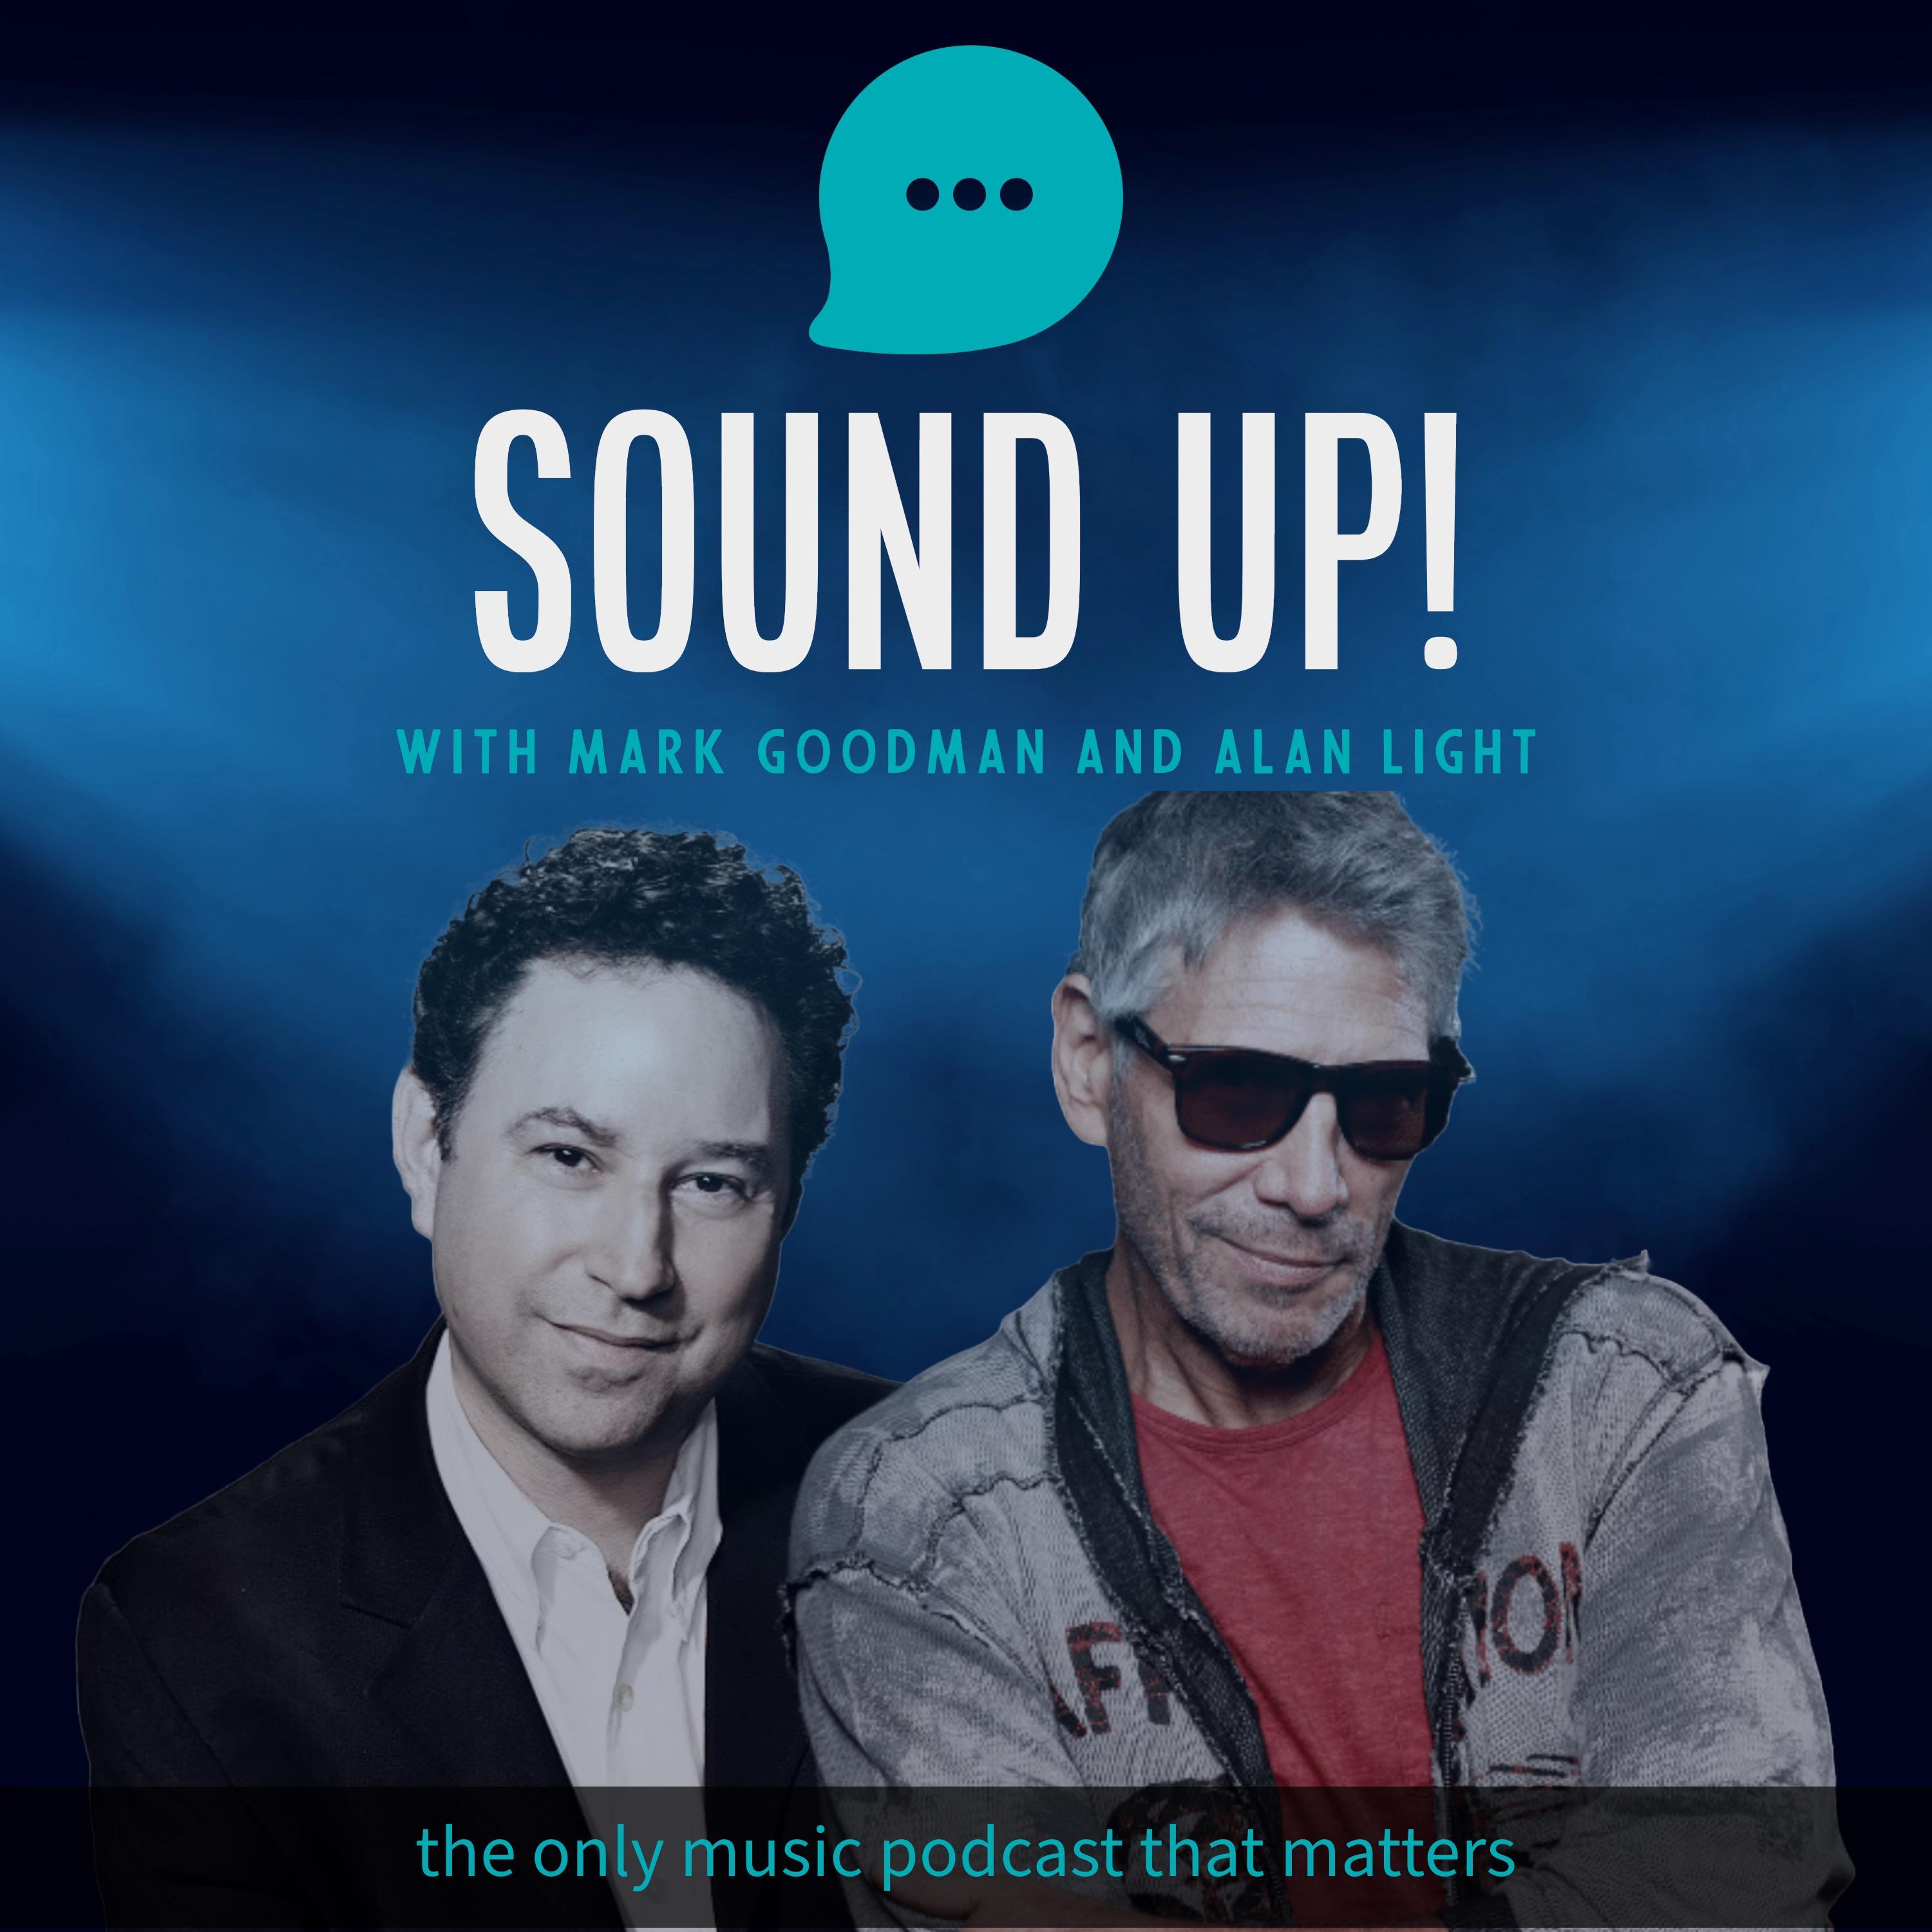 Show poster of Sound Up! with Mark Goodman and Alan Light